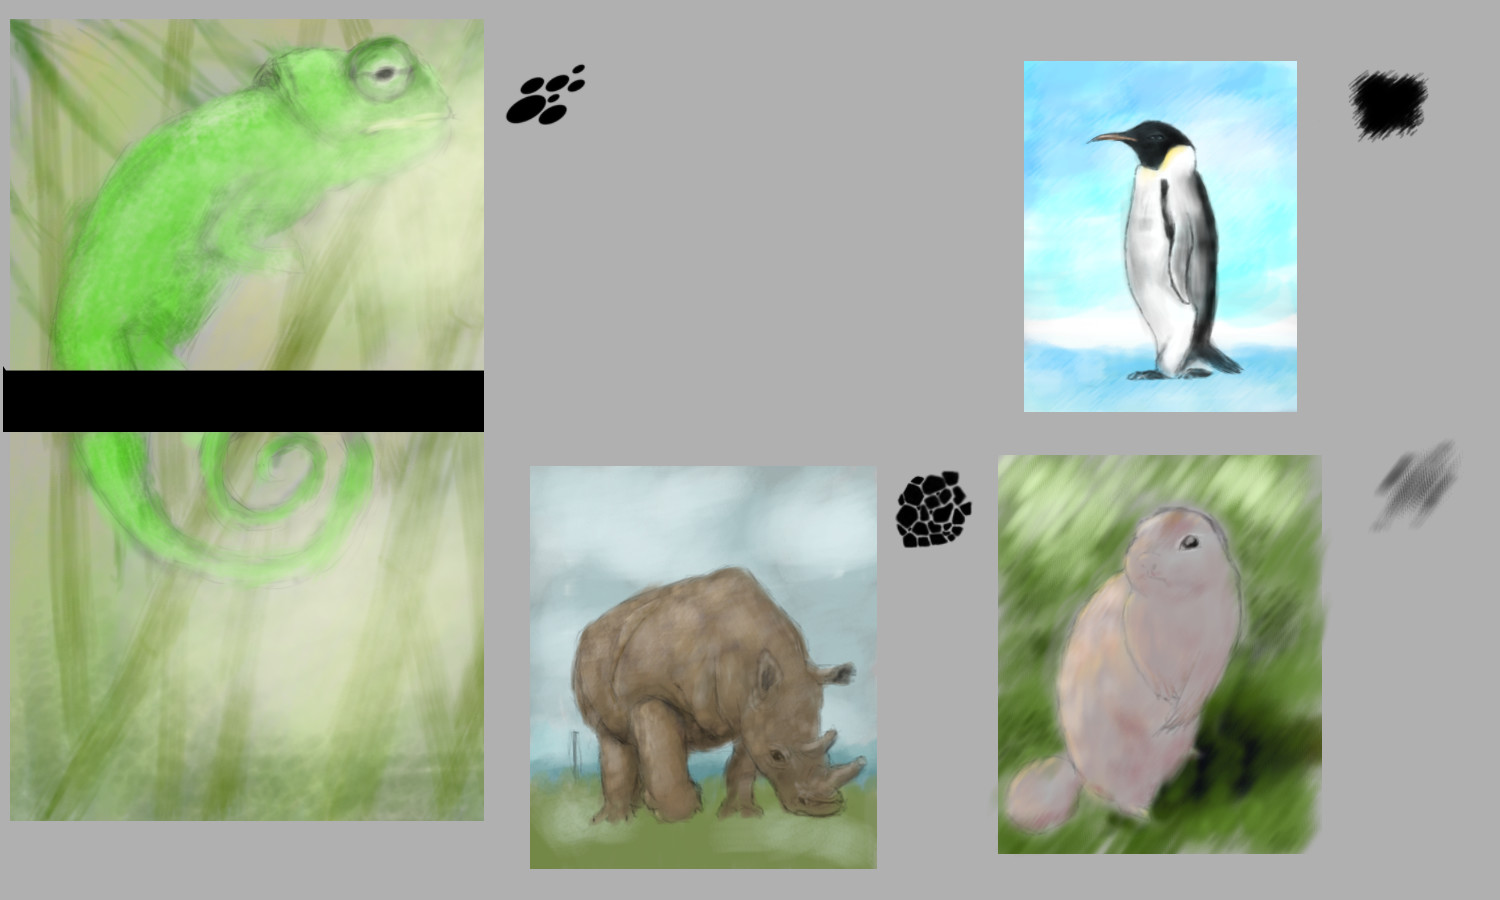 trying to use different brushes to get different textures for different animals.